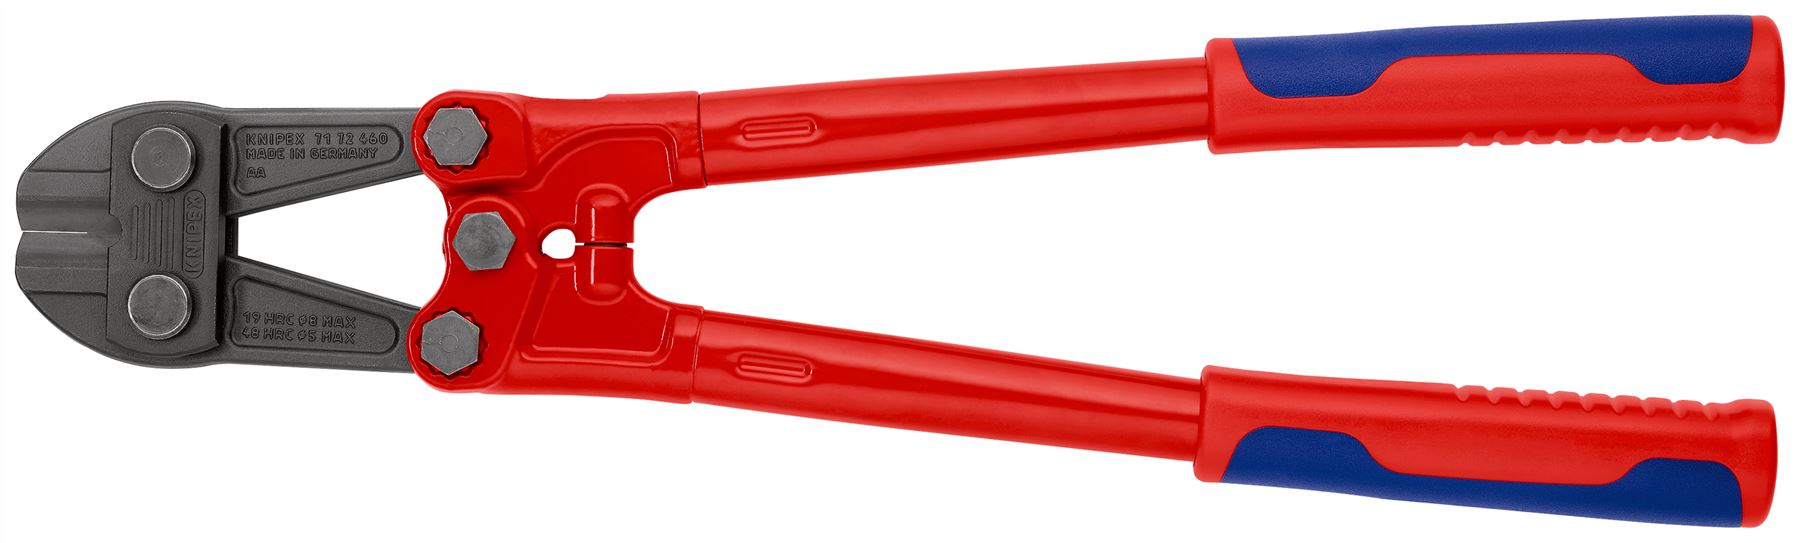 Knipex Bolt Cutter 460mm Multi Component Grips 71 72 460